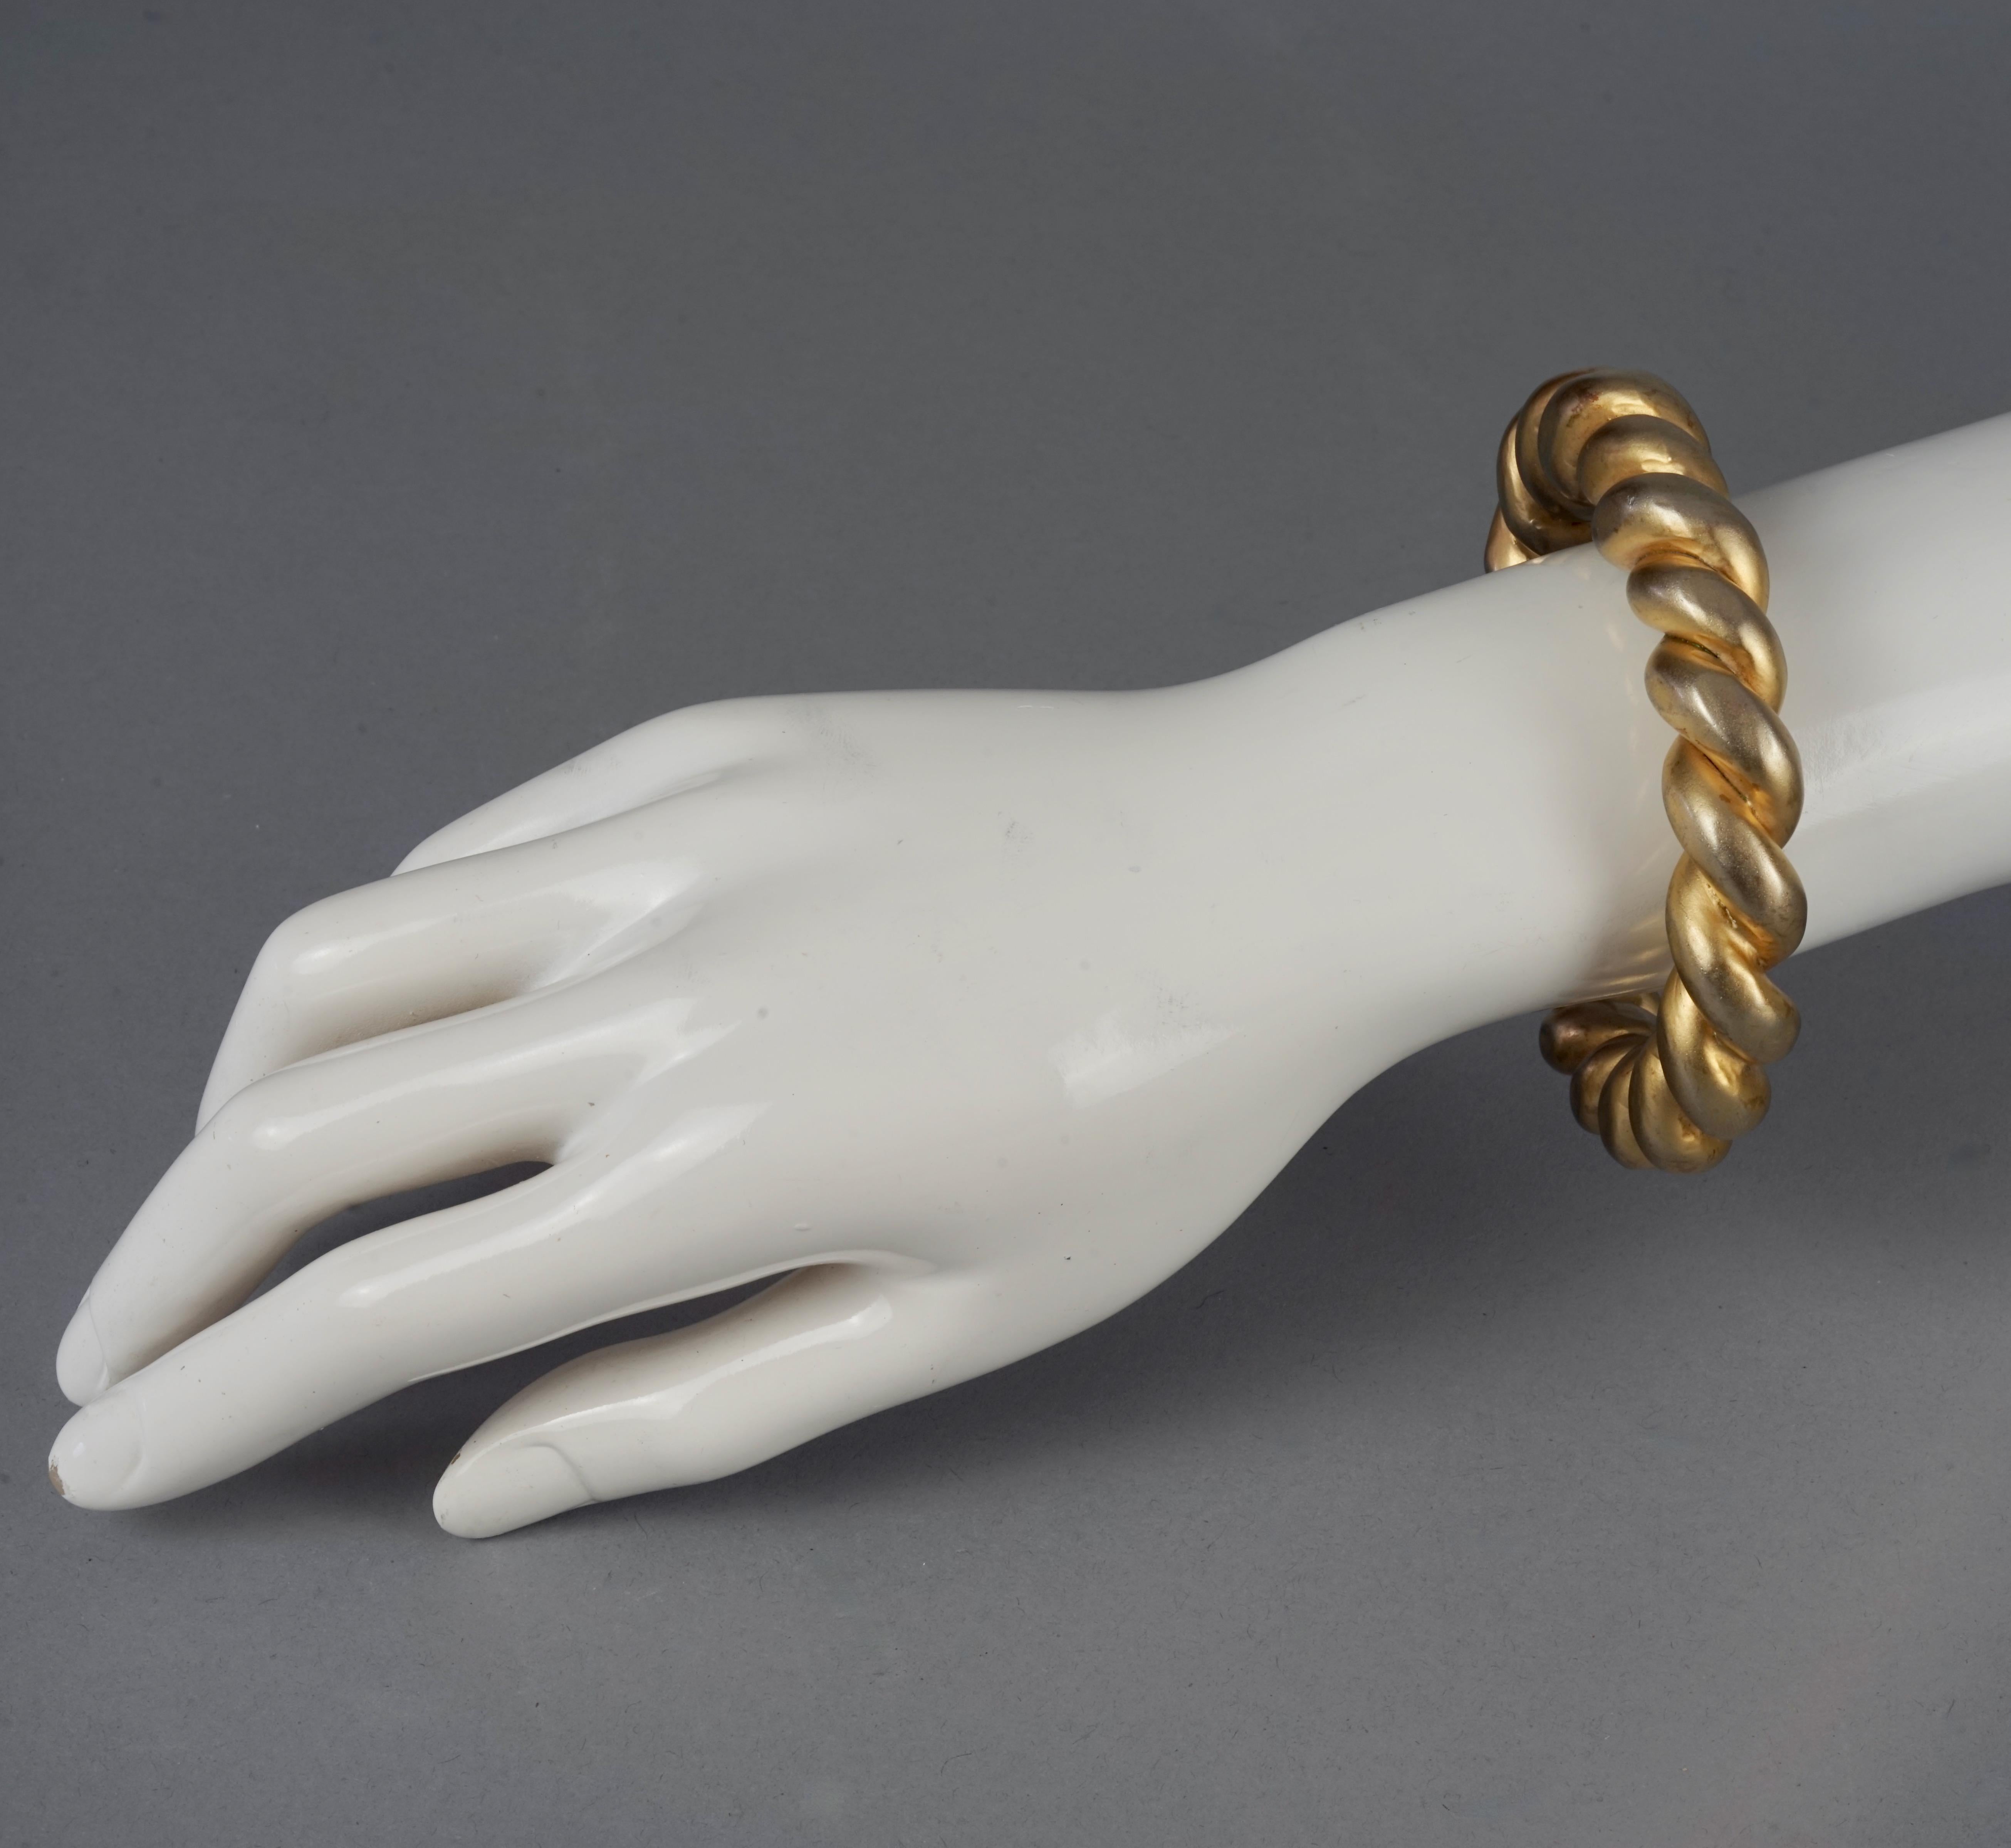 Vintage CHANEL by VICTOIRE de CASTELLANE Twisted Rope Bangle Bracelet

Measurements:
Thickness: 0.59 inch (1.5 cm)
Inner Circumference: 7.48 inches (19 cm)

Features:
- 100% Authentic CHANEL by VICTOIRE de CASTELLANE
- Twisted cord in cold cast